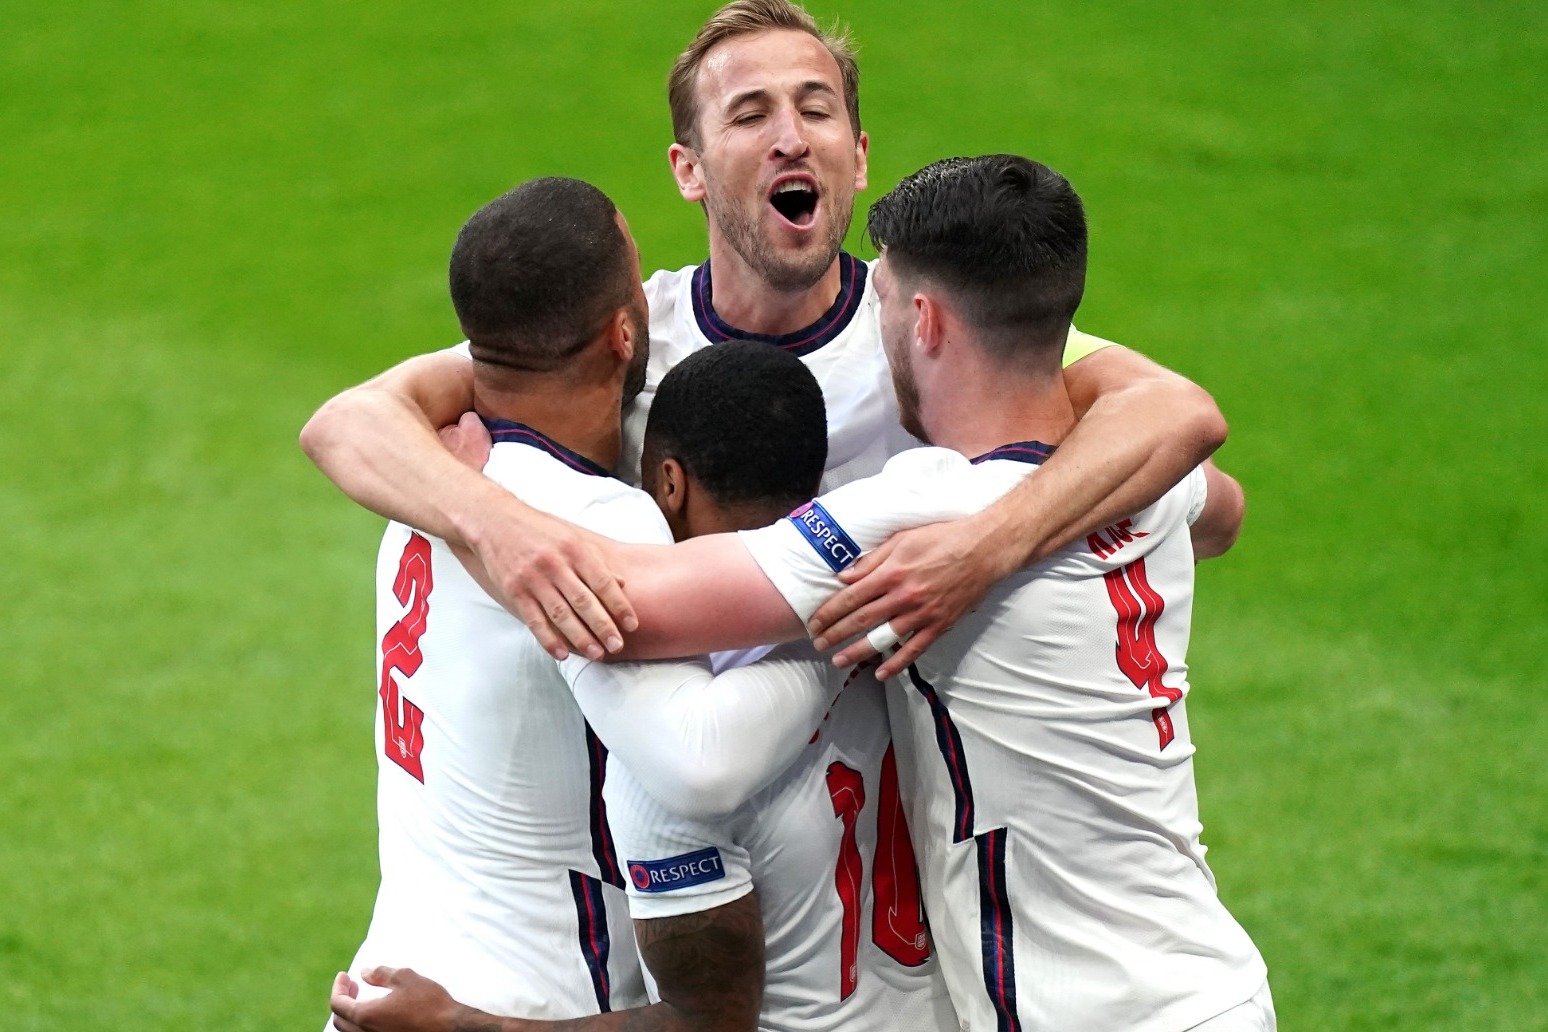 Gareth Southgate ready for England to up their game in Euro 2020 round of 16 